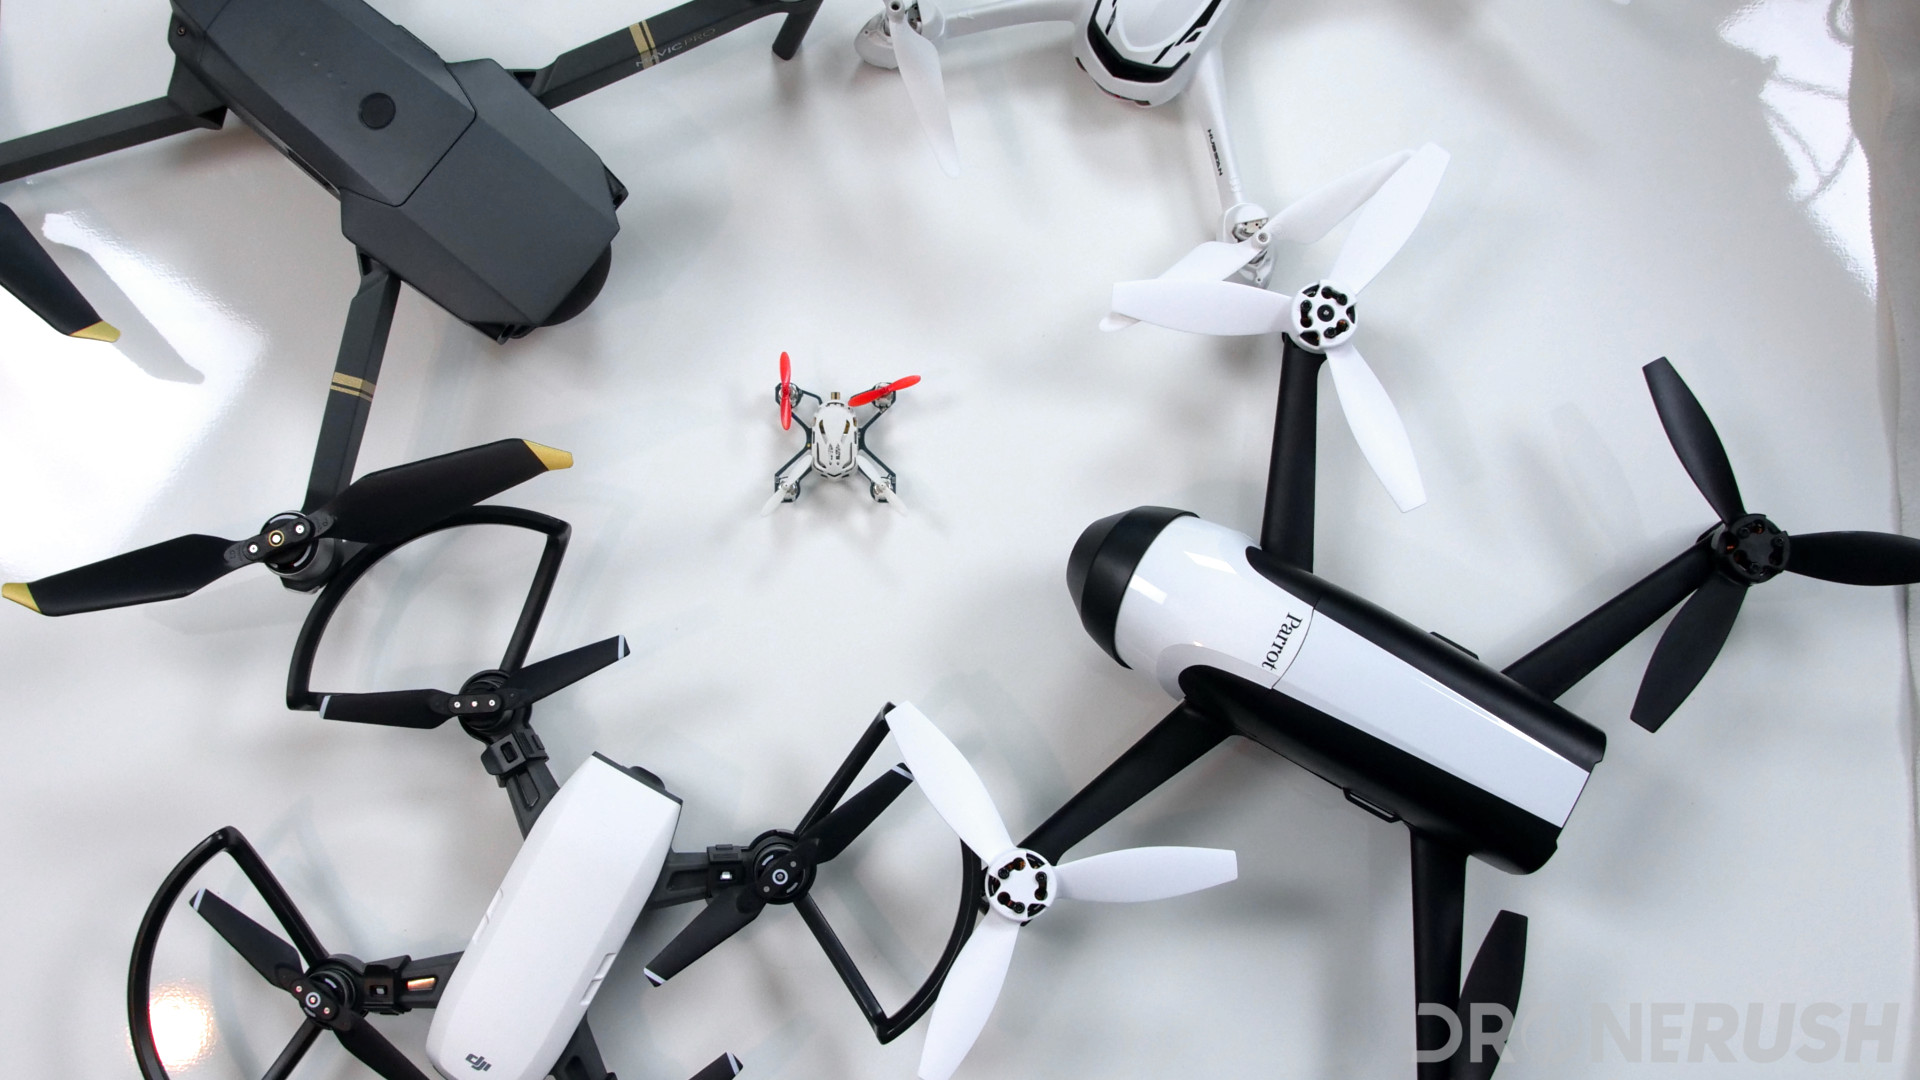 what is the best brand of drone